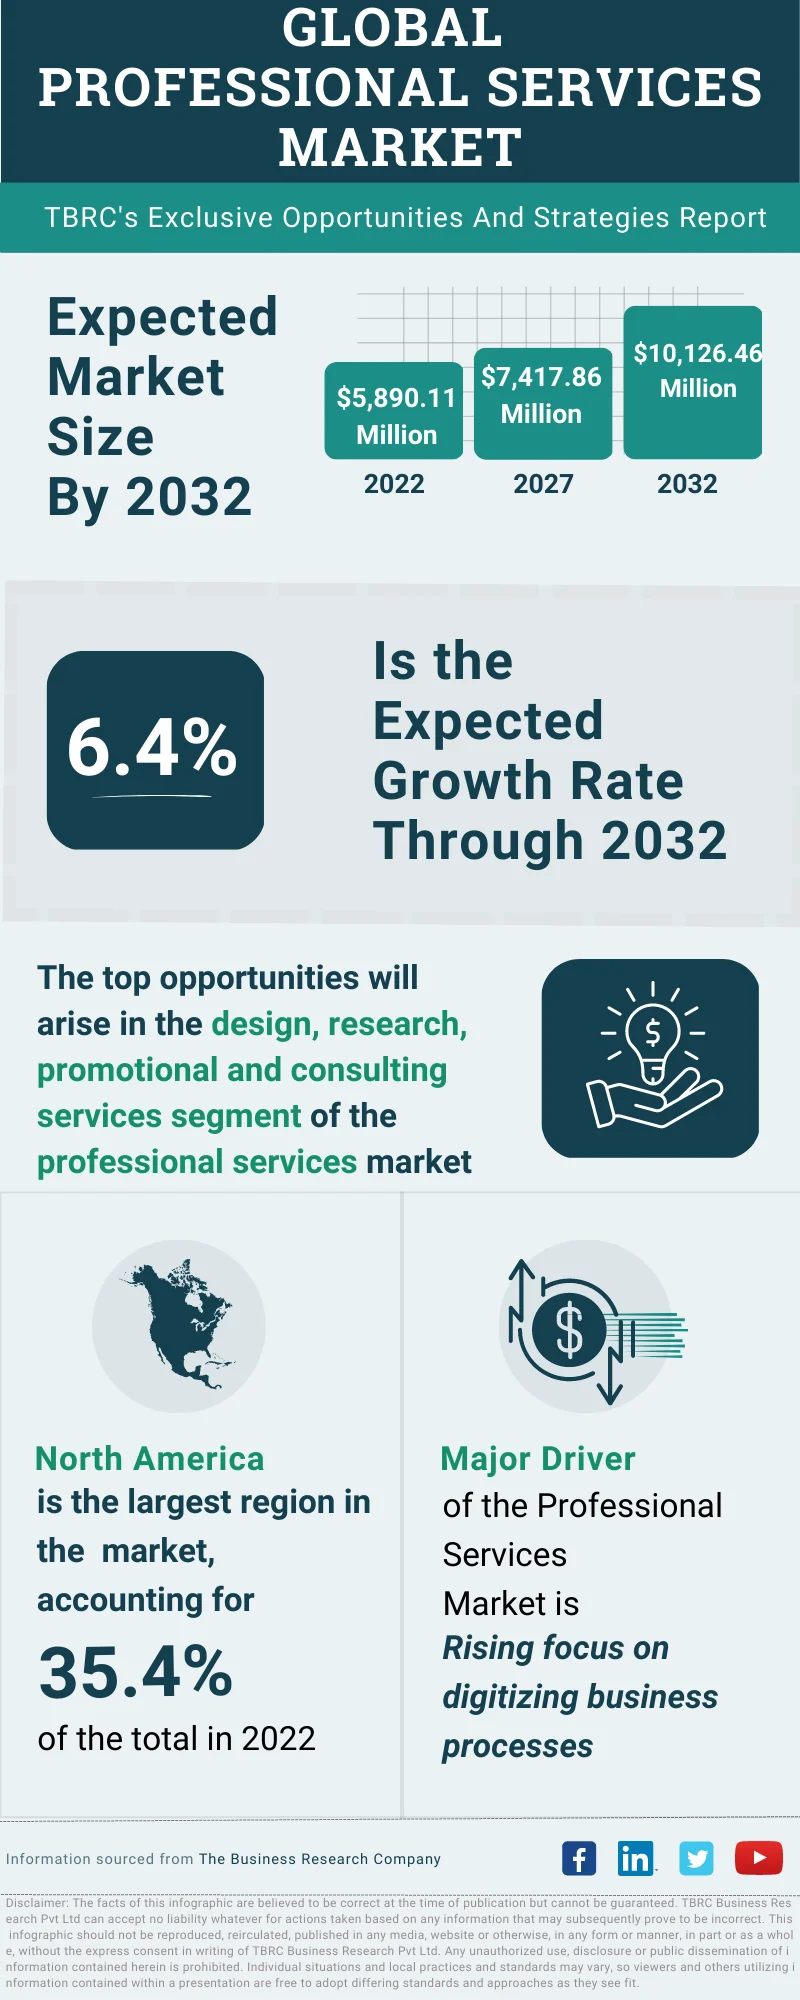 Professional Services Global Market Opportunities And Strategies To 2032